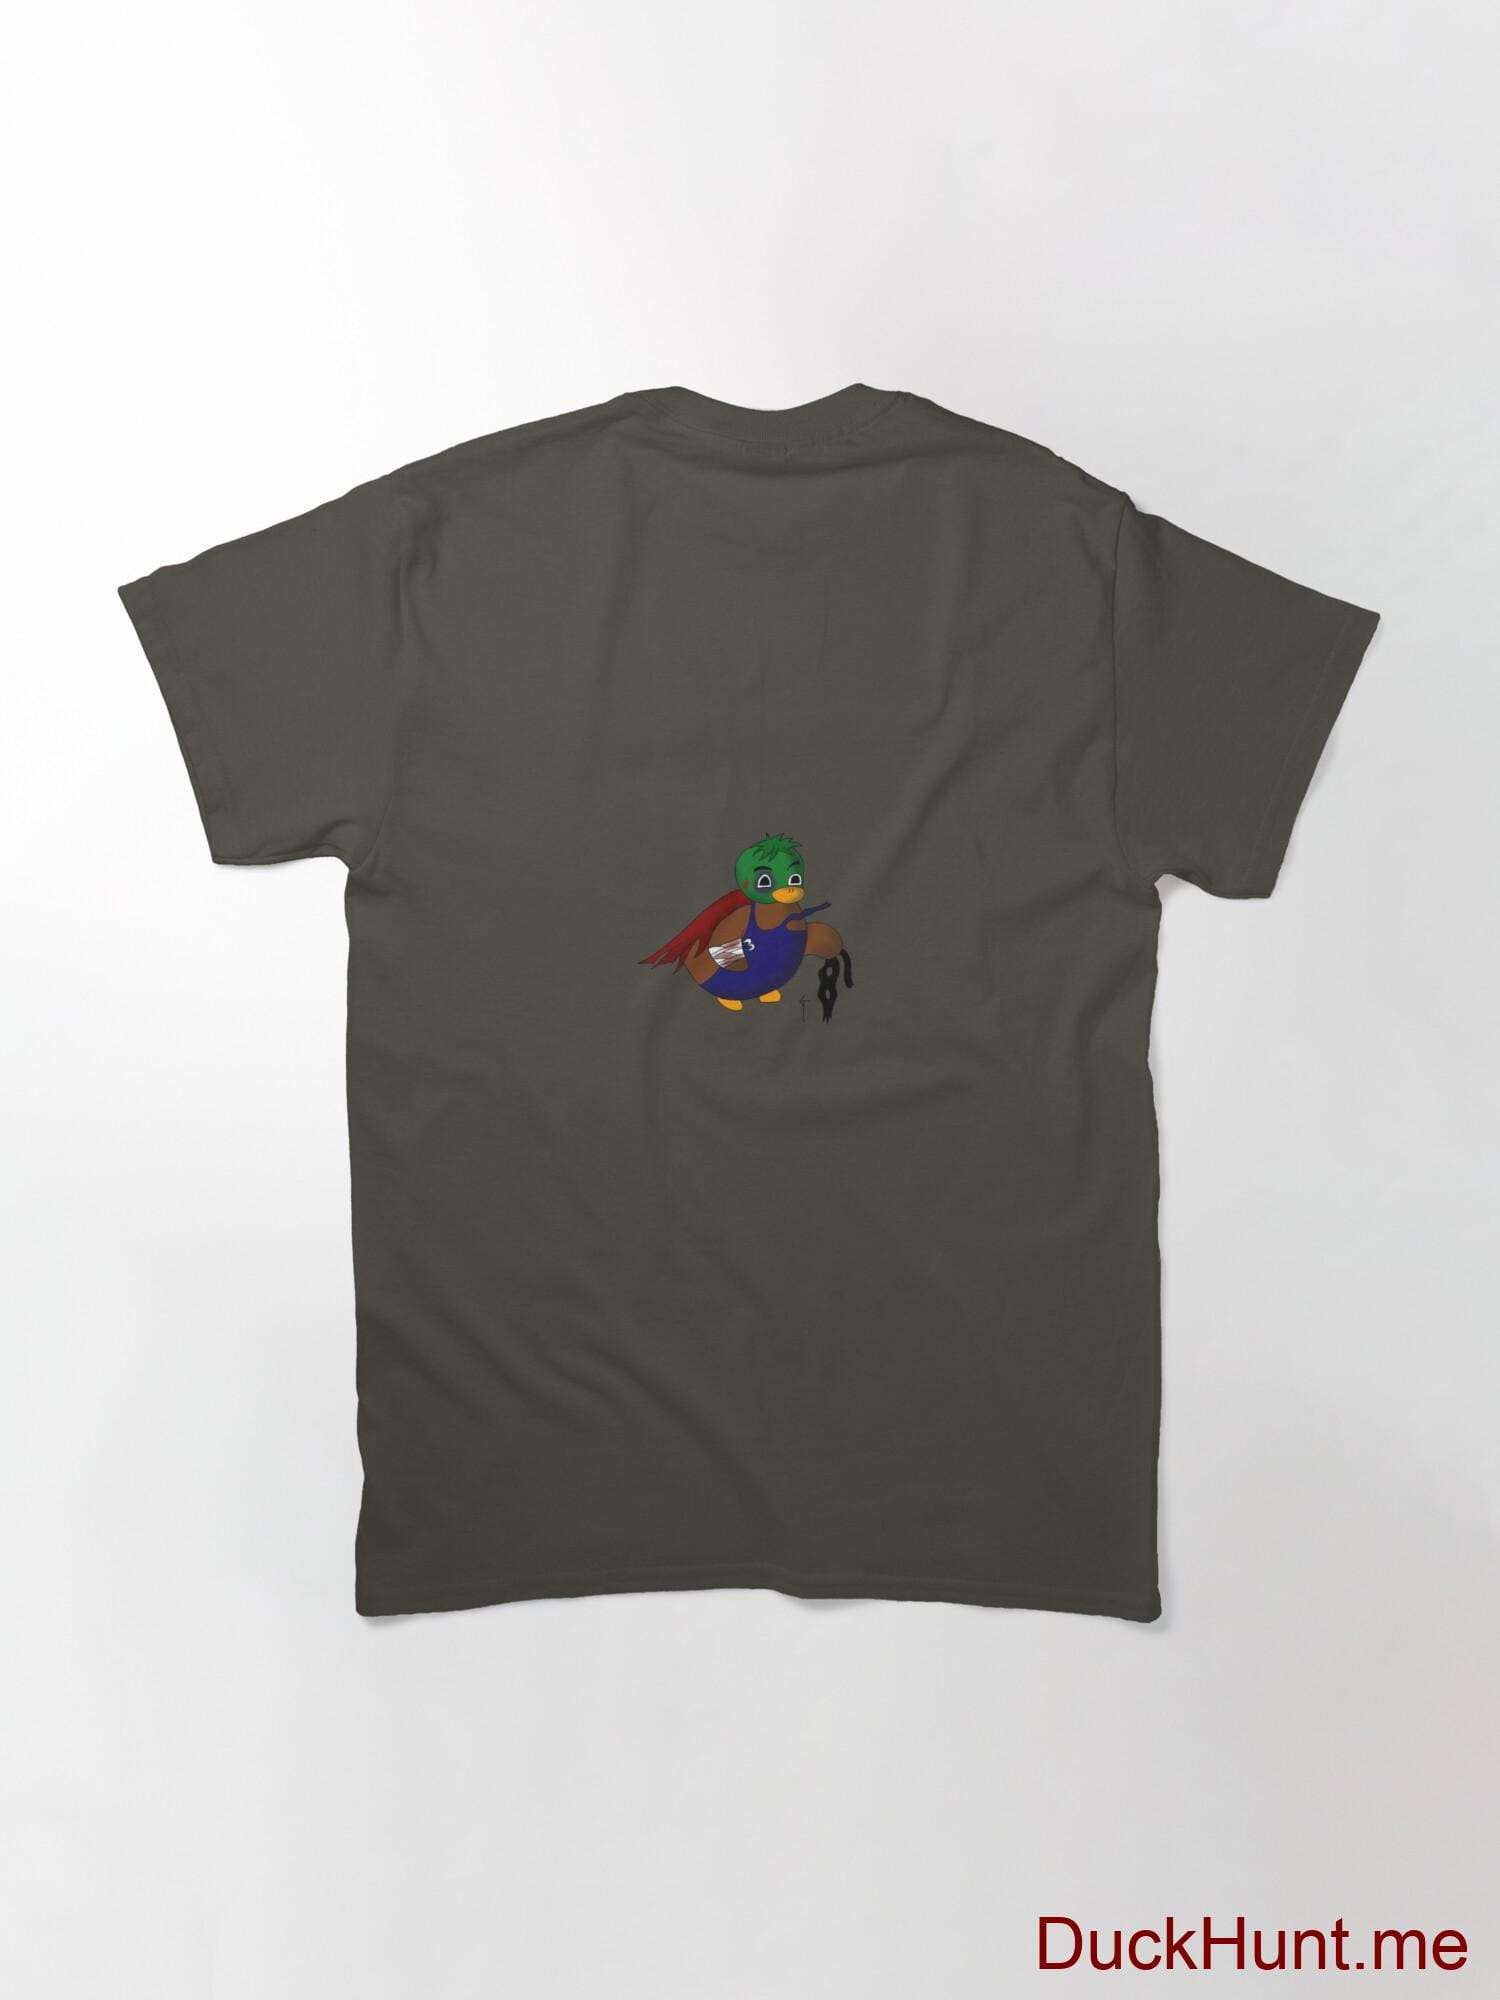 Dead DuckHunt Boss (smokeless) Army Classic T-Shirt (Back printed) alternative image 1